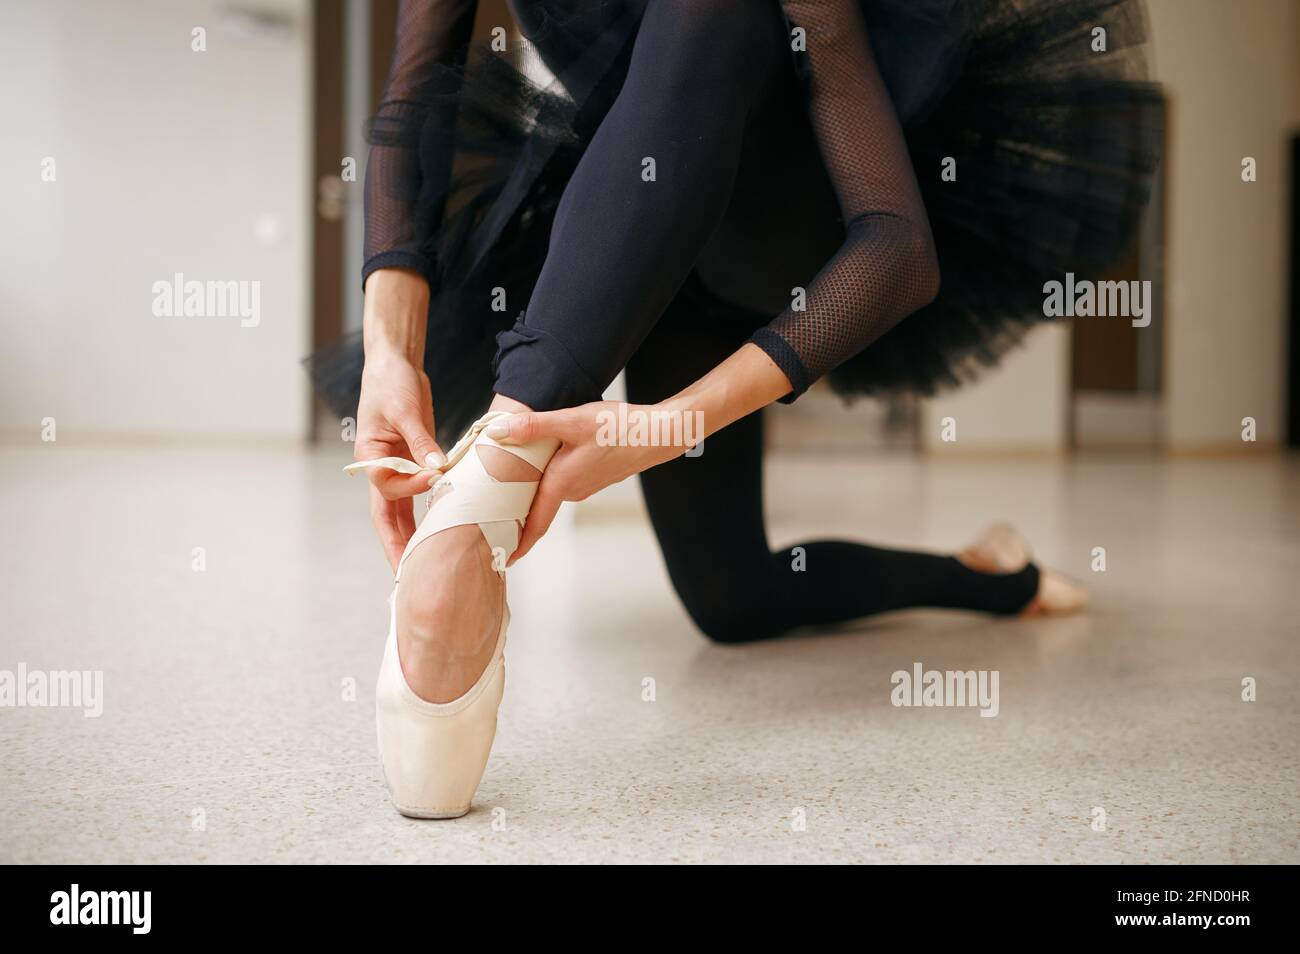 Ballerina doing stretching exercise in class Stock Photo